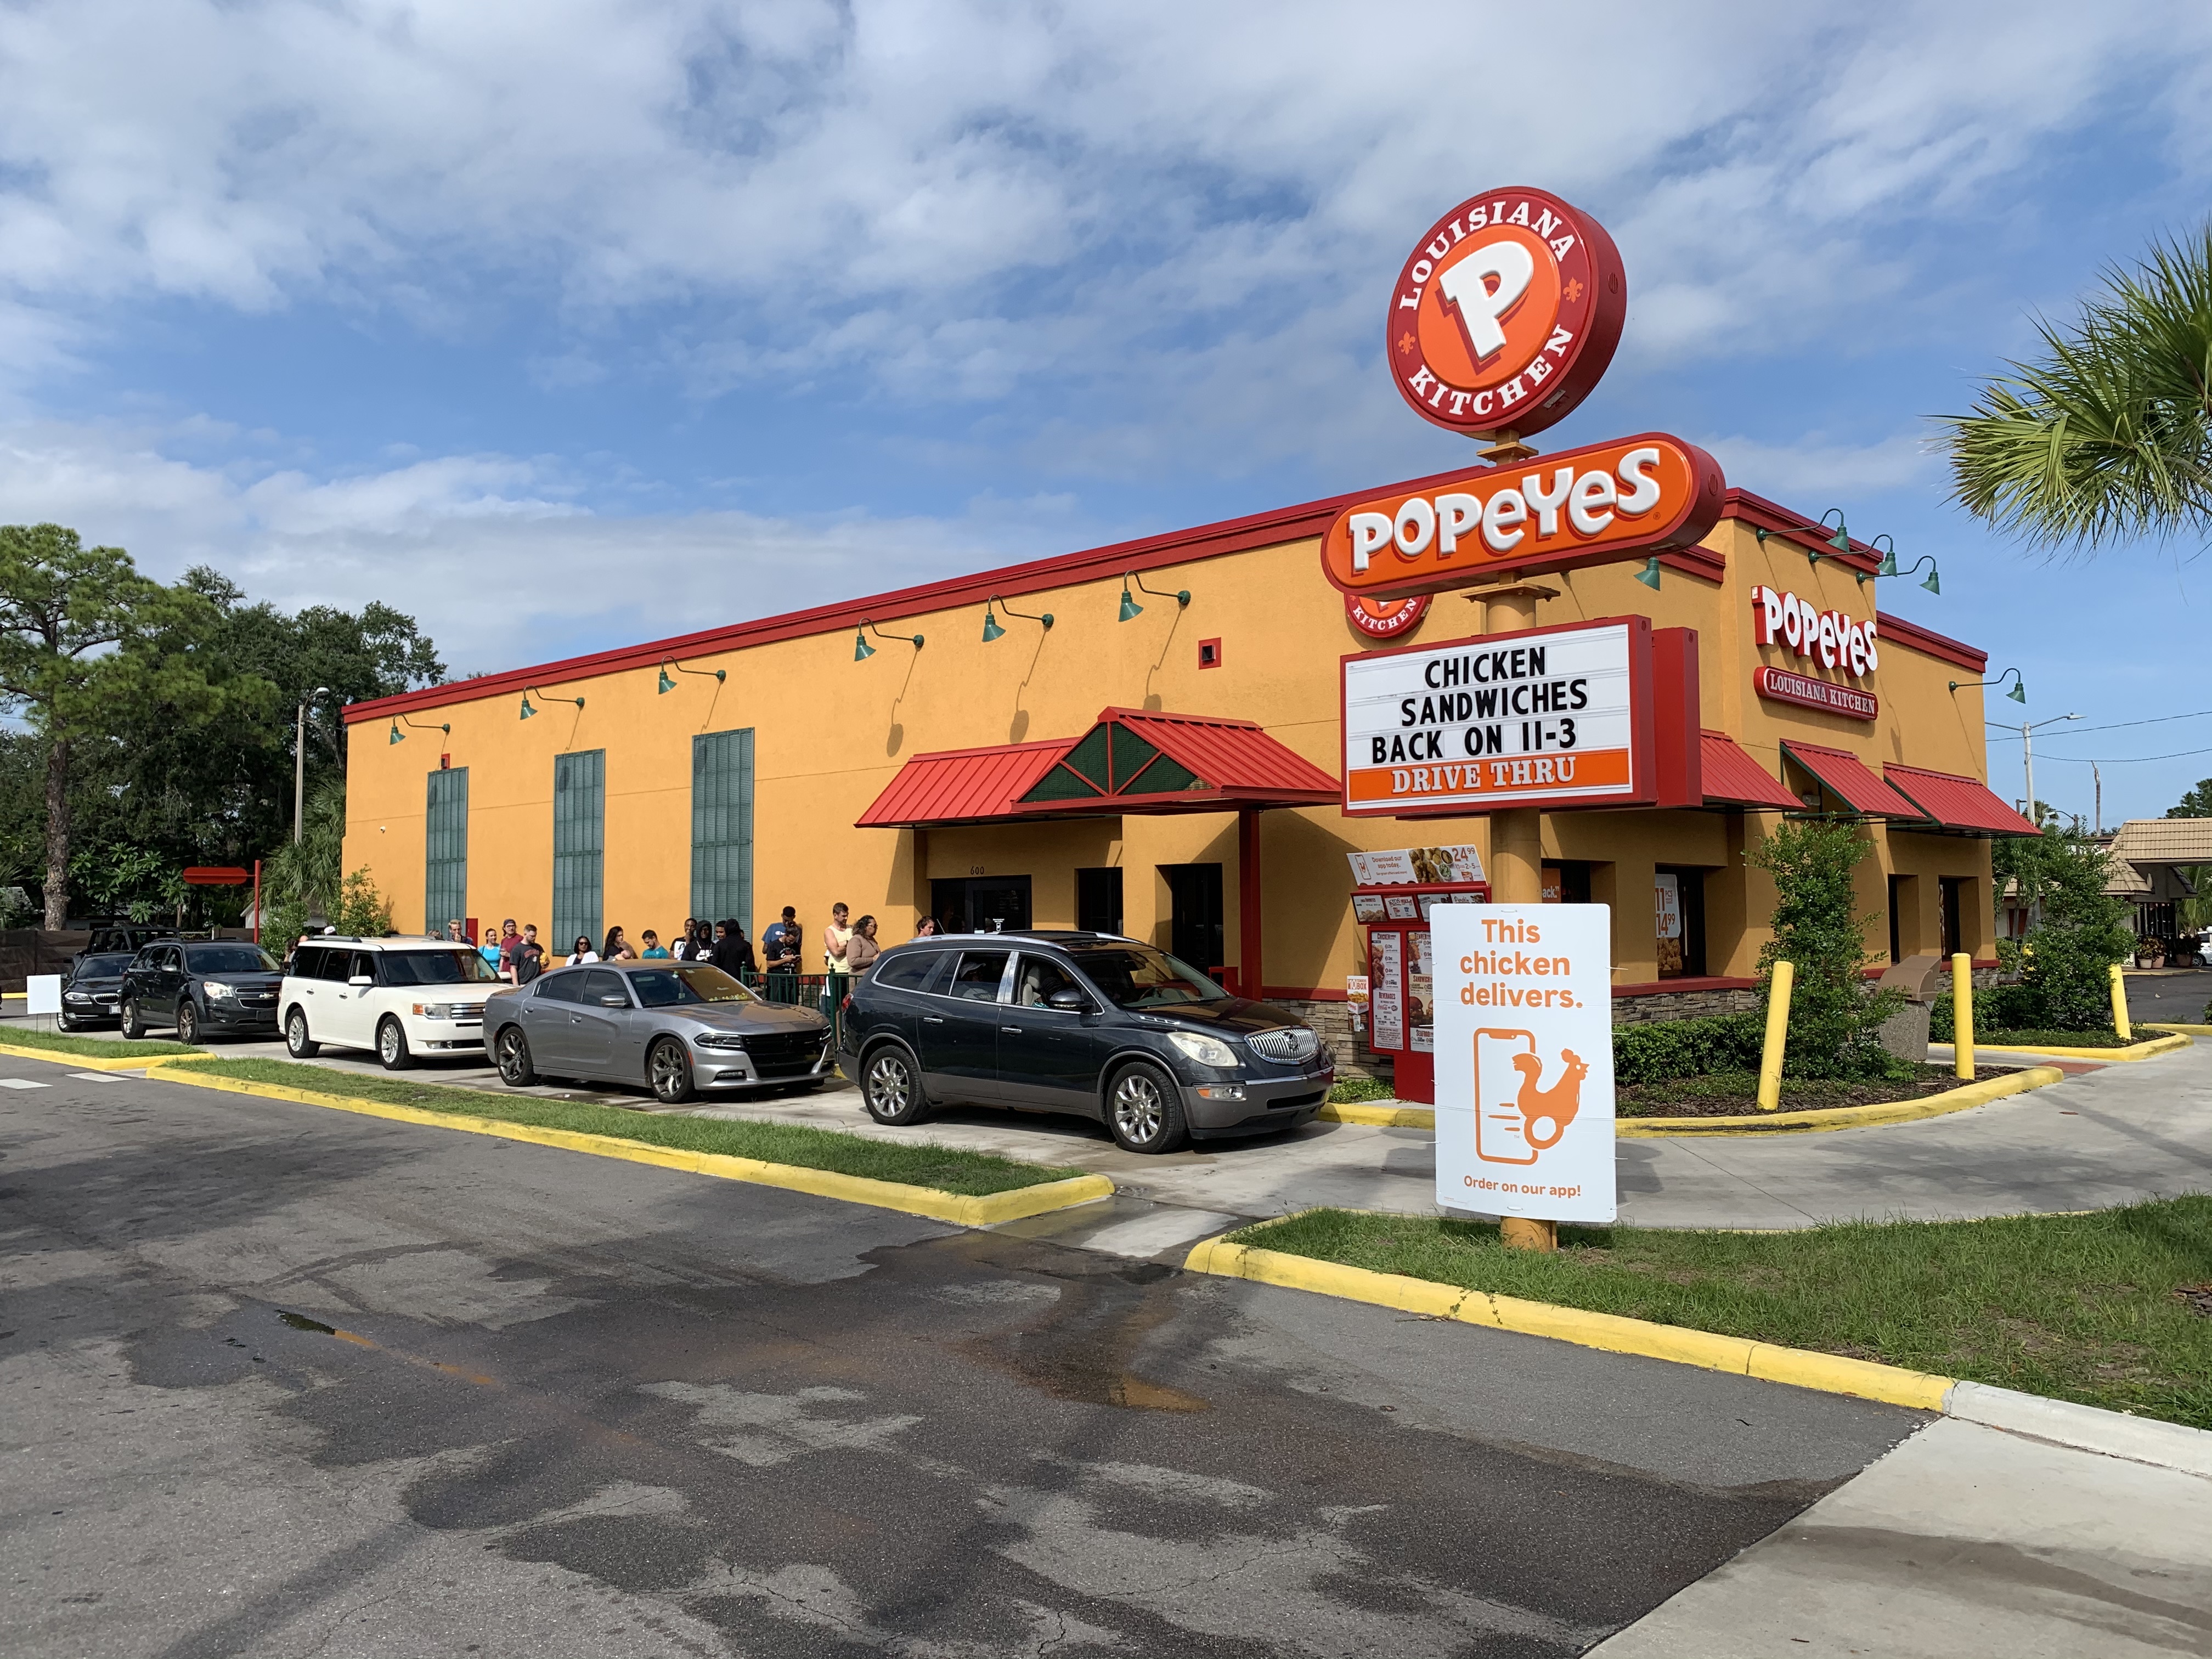 The Popeyes Chicken Sandwich Is Back Residents Are Flocking To Get It